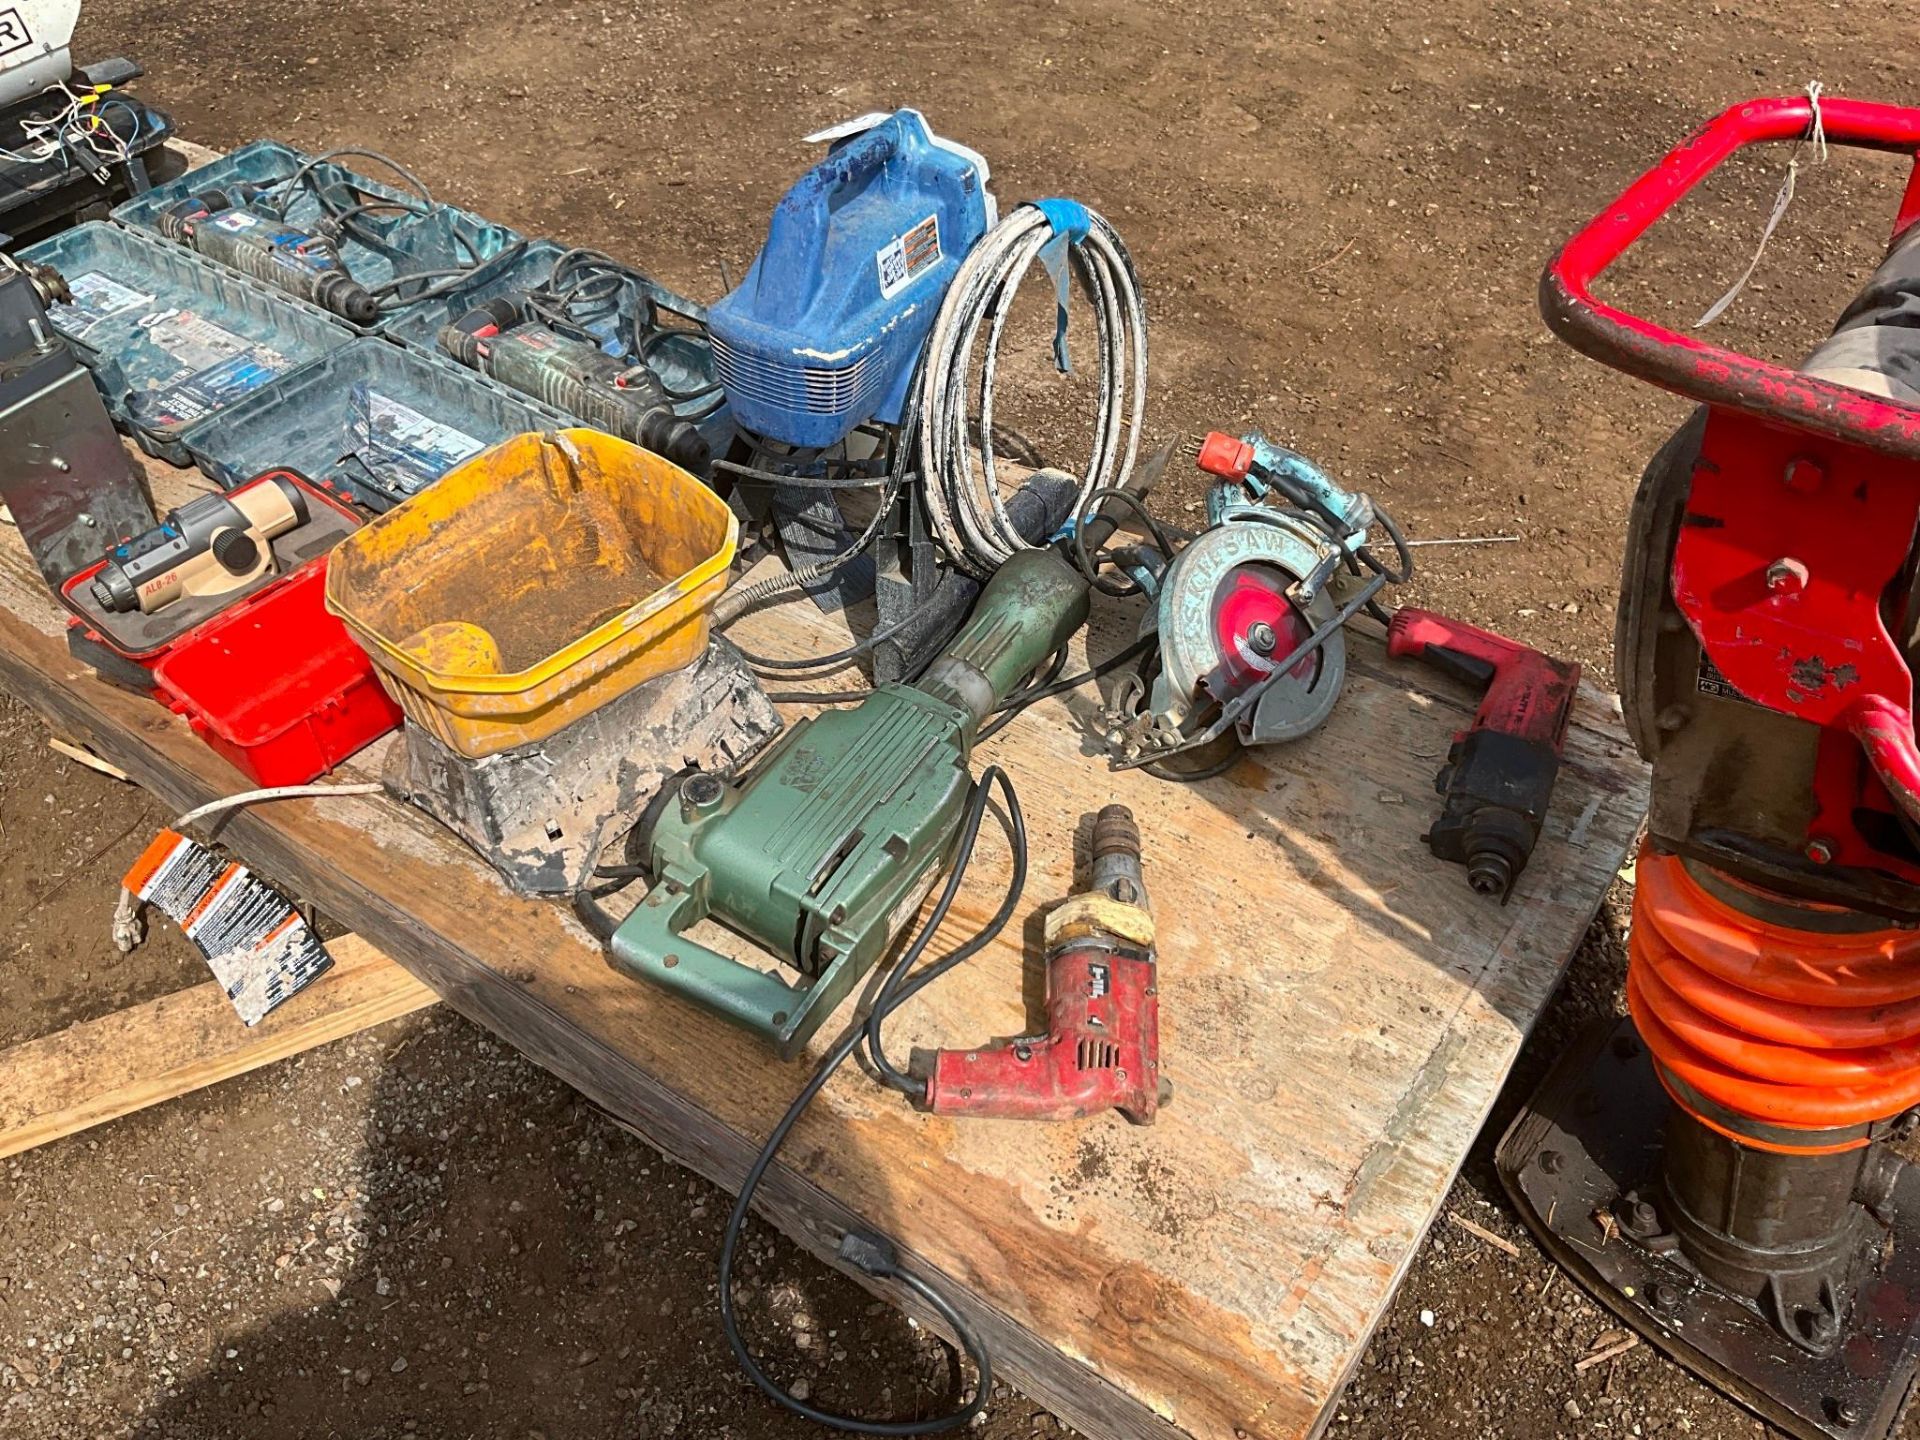 LOT OF SAWS, DRILLS, COMPACTORS, HEATERS, ETC. - Image 11 of 13